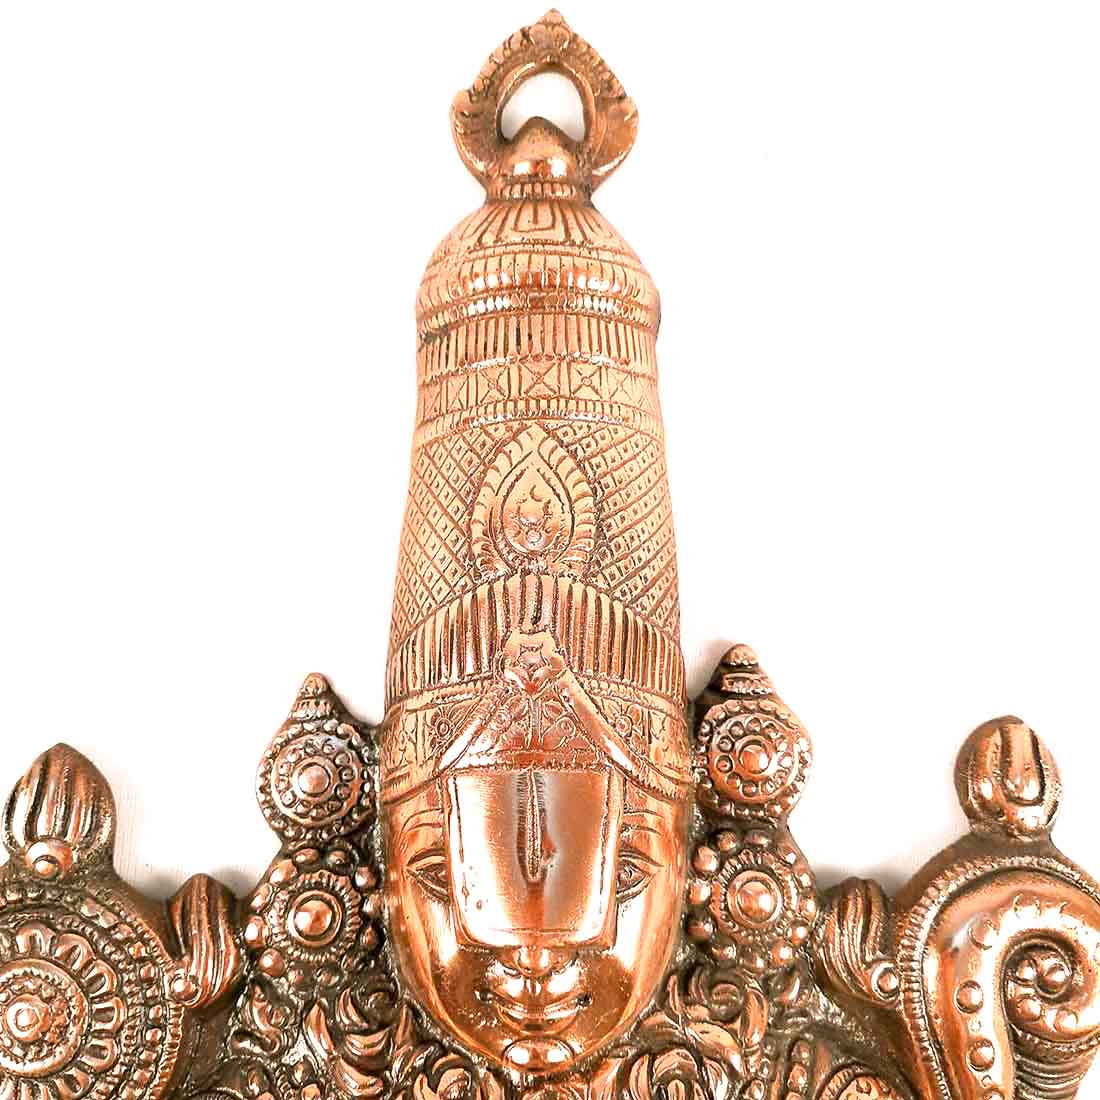 Lord Balaji Wall Hanging Idol | Shri Venkateswara Swami Wall Statue | Tirupati Balaji Wall Hanging Murti - for Home, Living Room, Office, Puja & Gift - 15 Inch